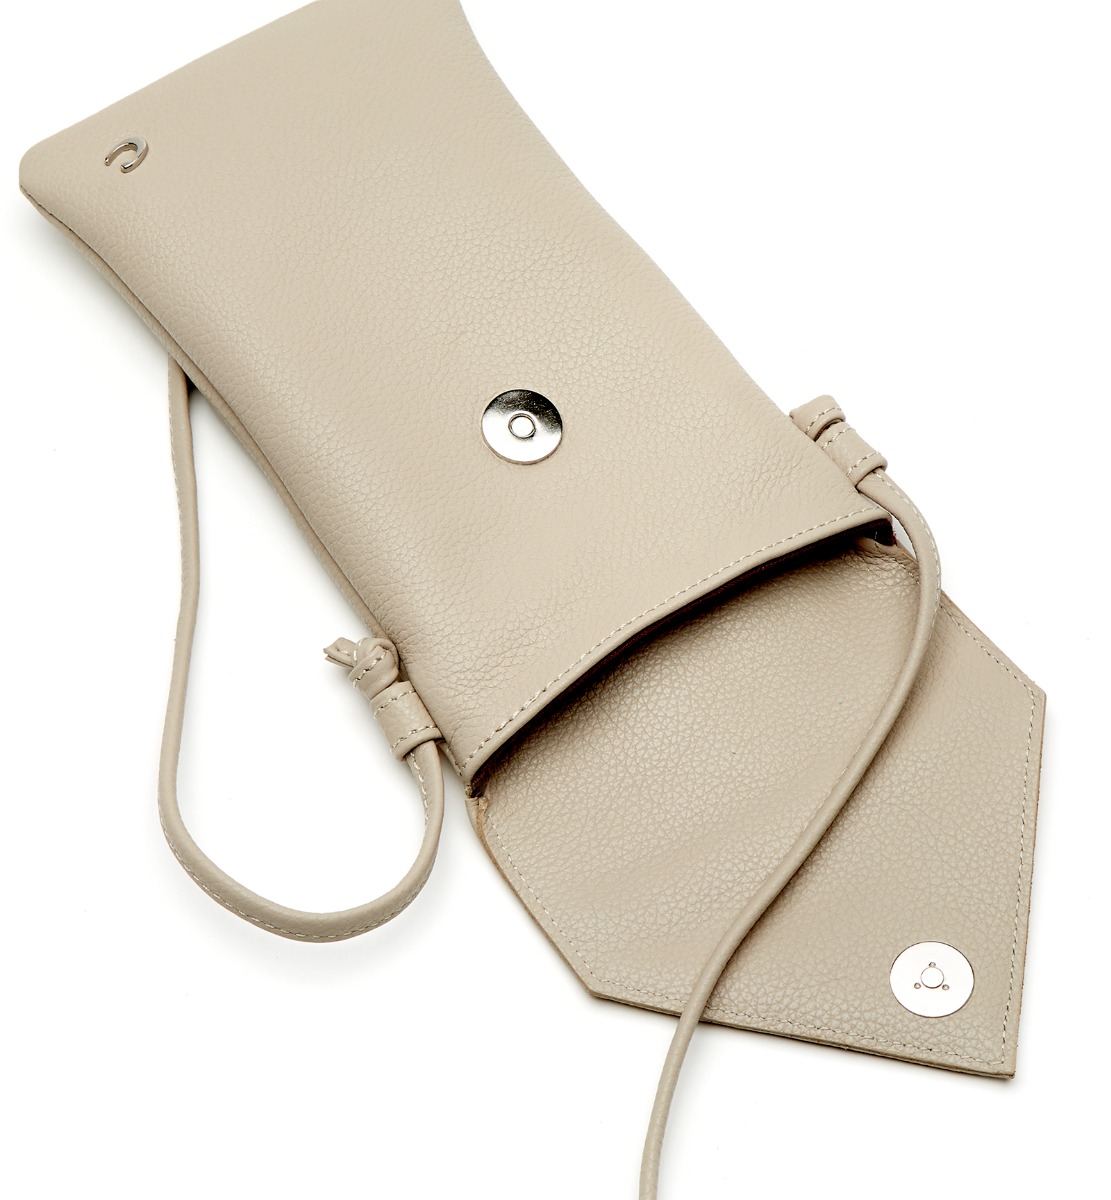 Shop La Canadienne Marry Leather Phone Bag In Beige